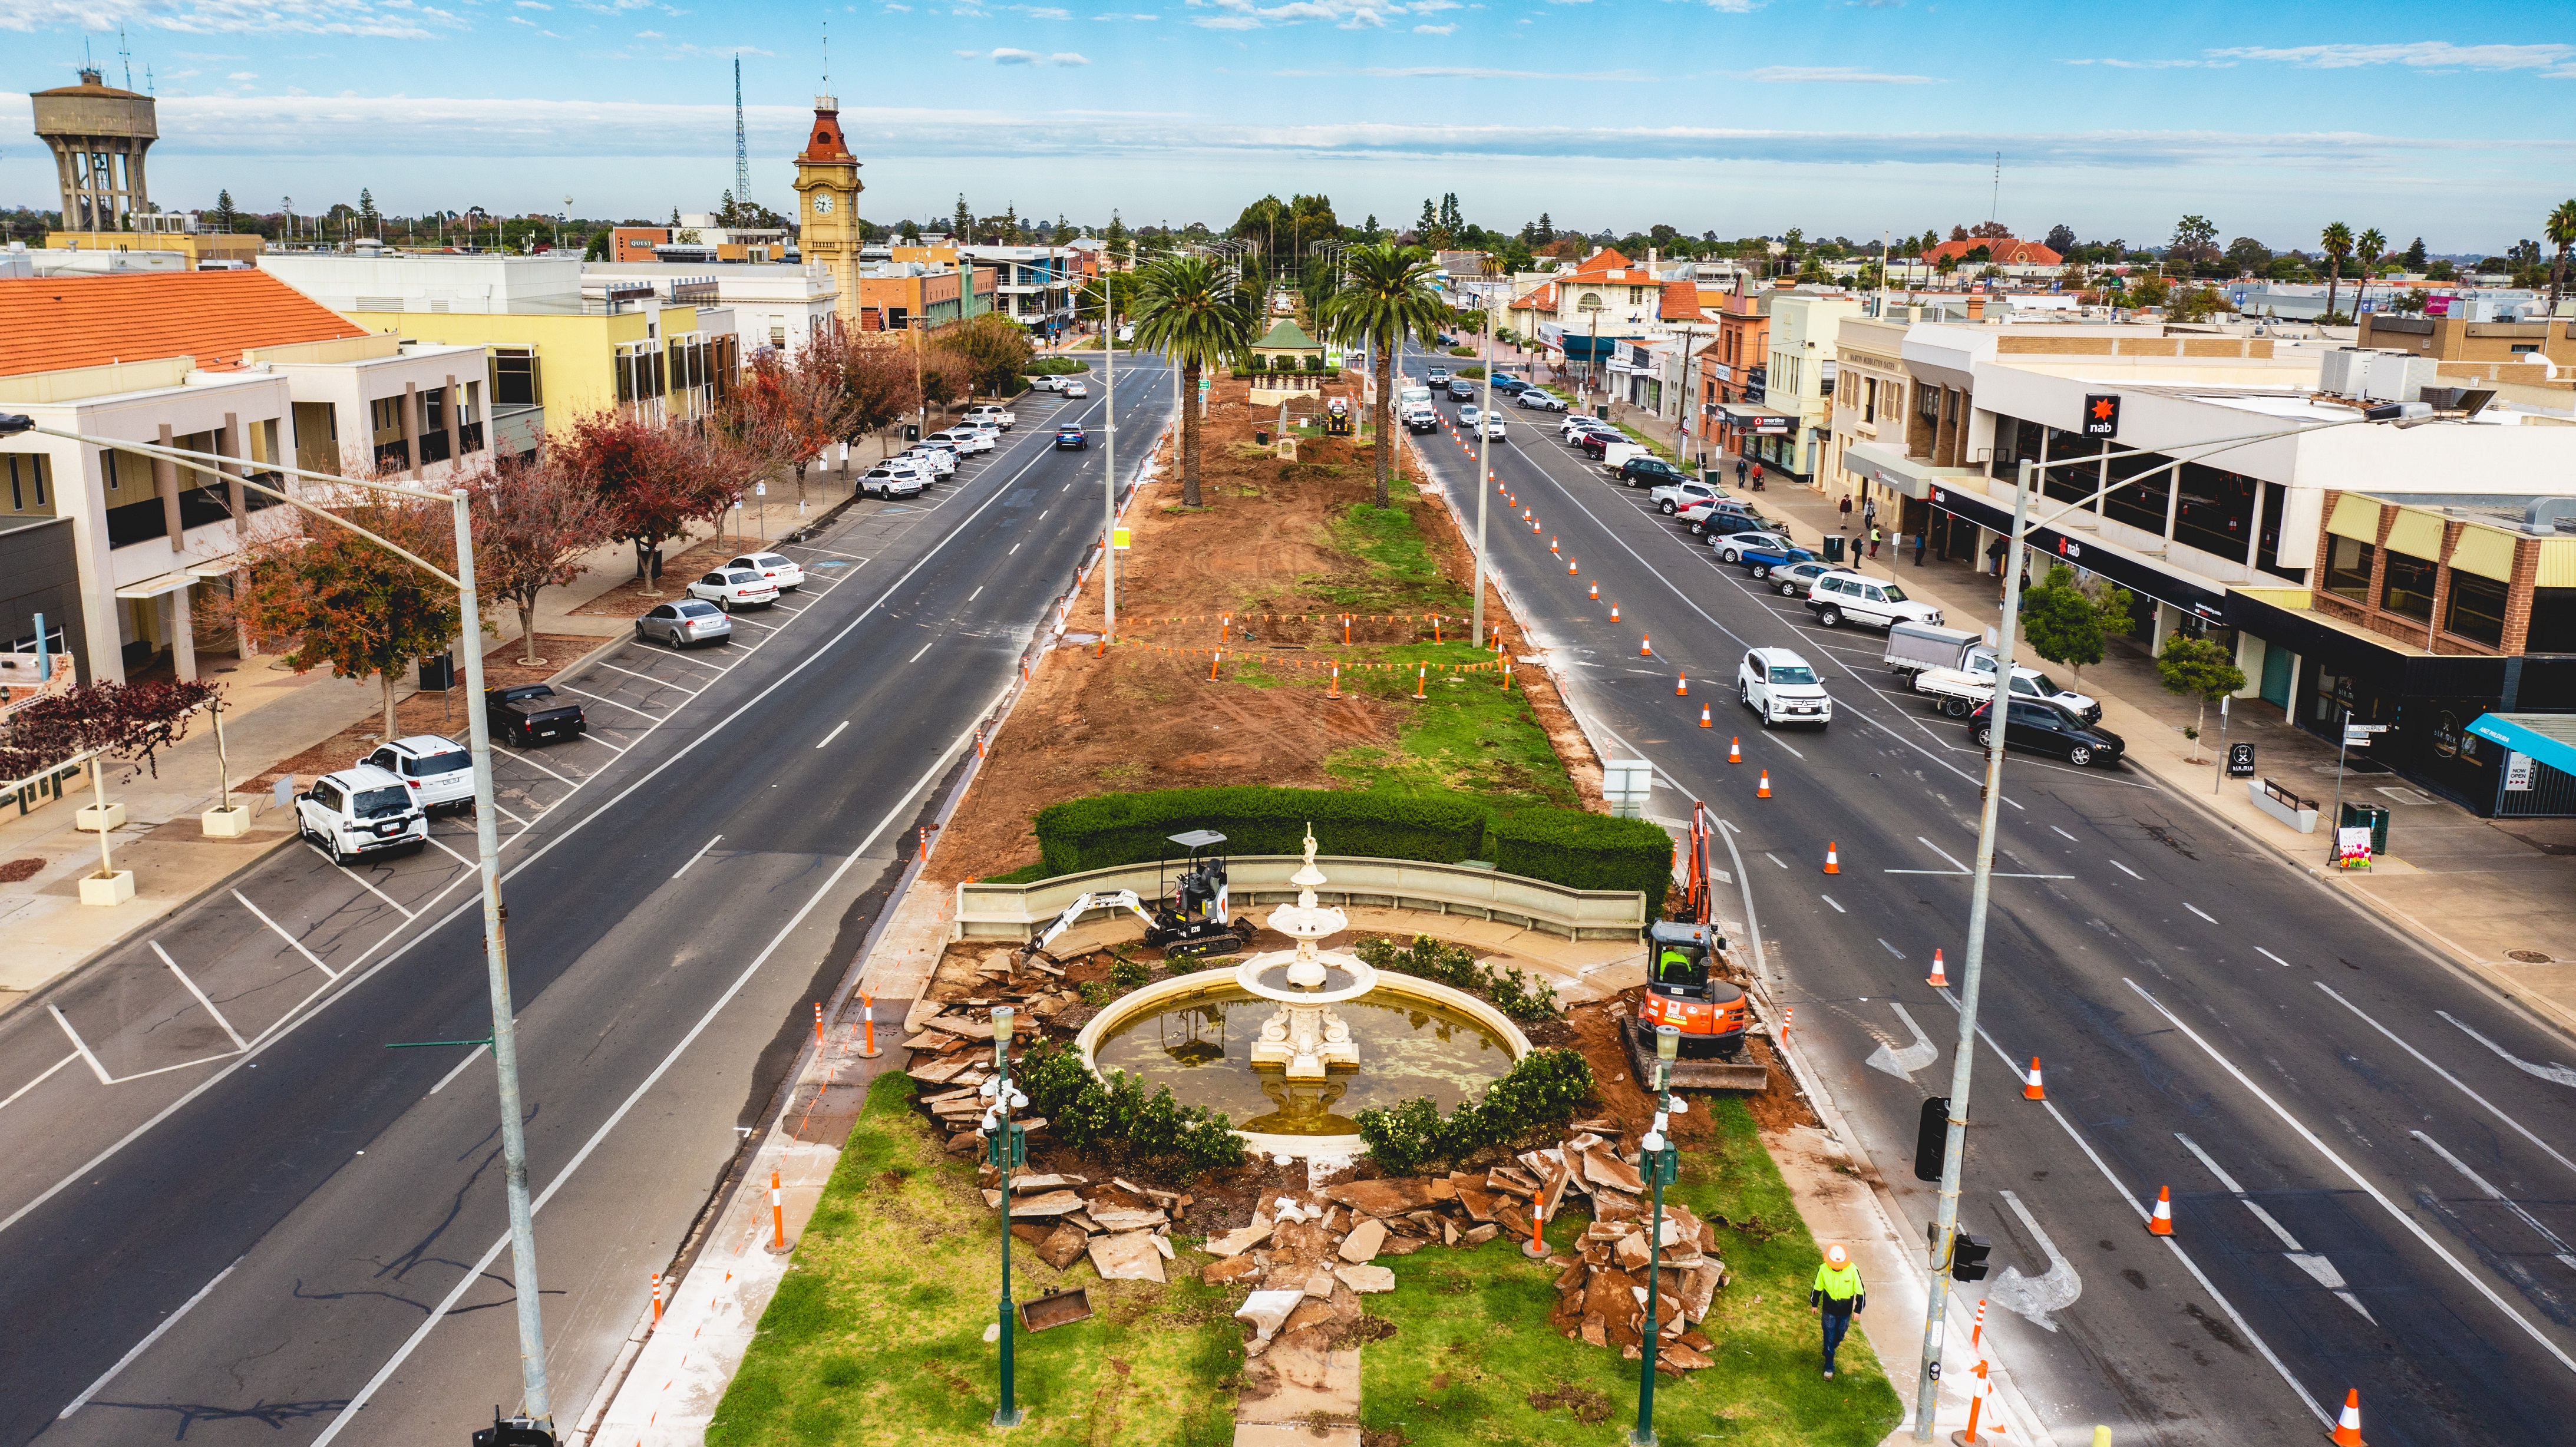 Early demolition work on Deakin Avenue centre median between Eighth and Ninth Streets Mildura, May 2021.